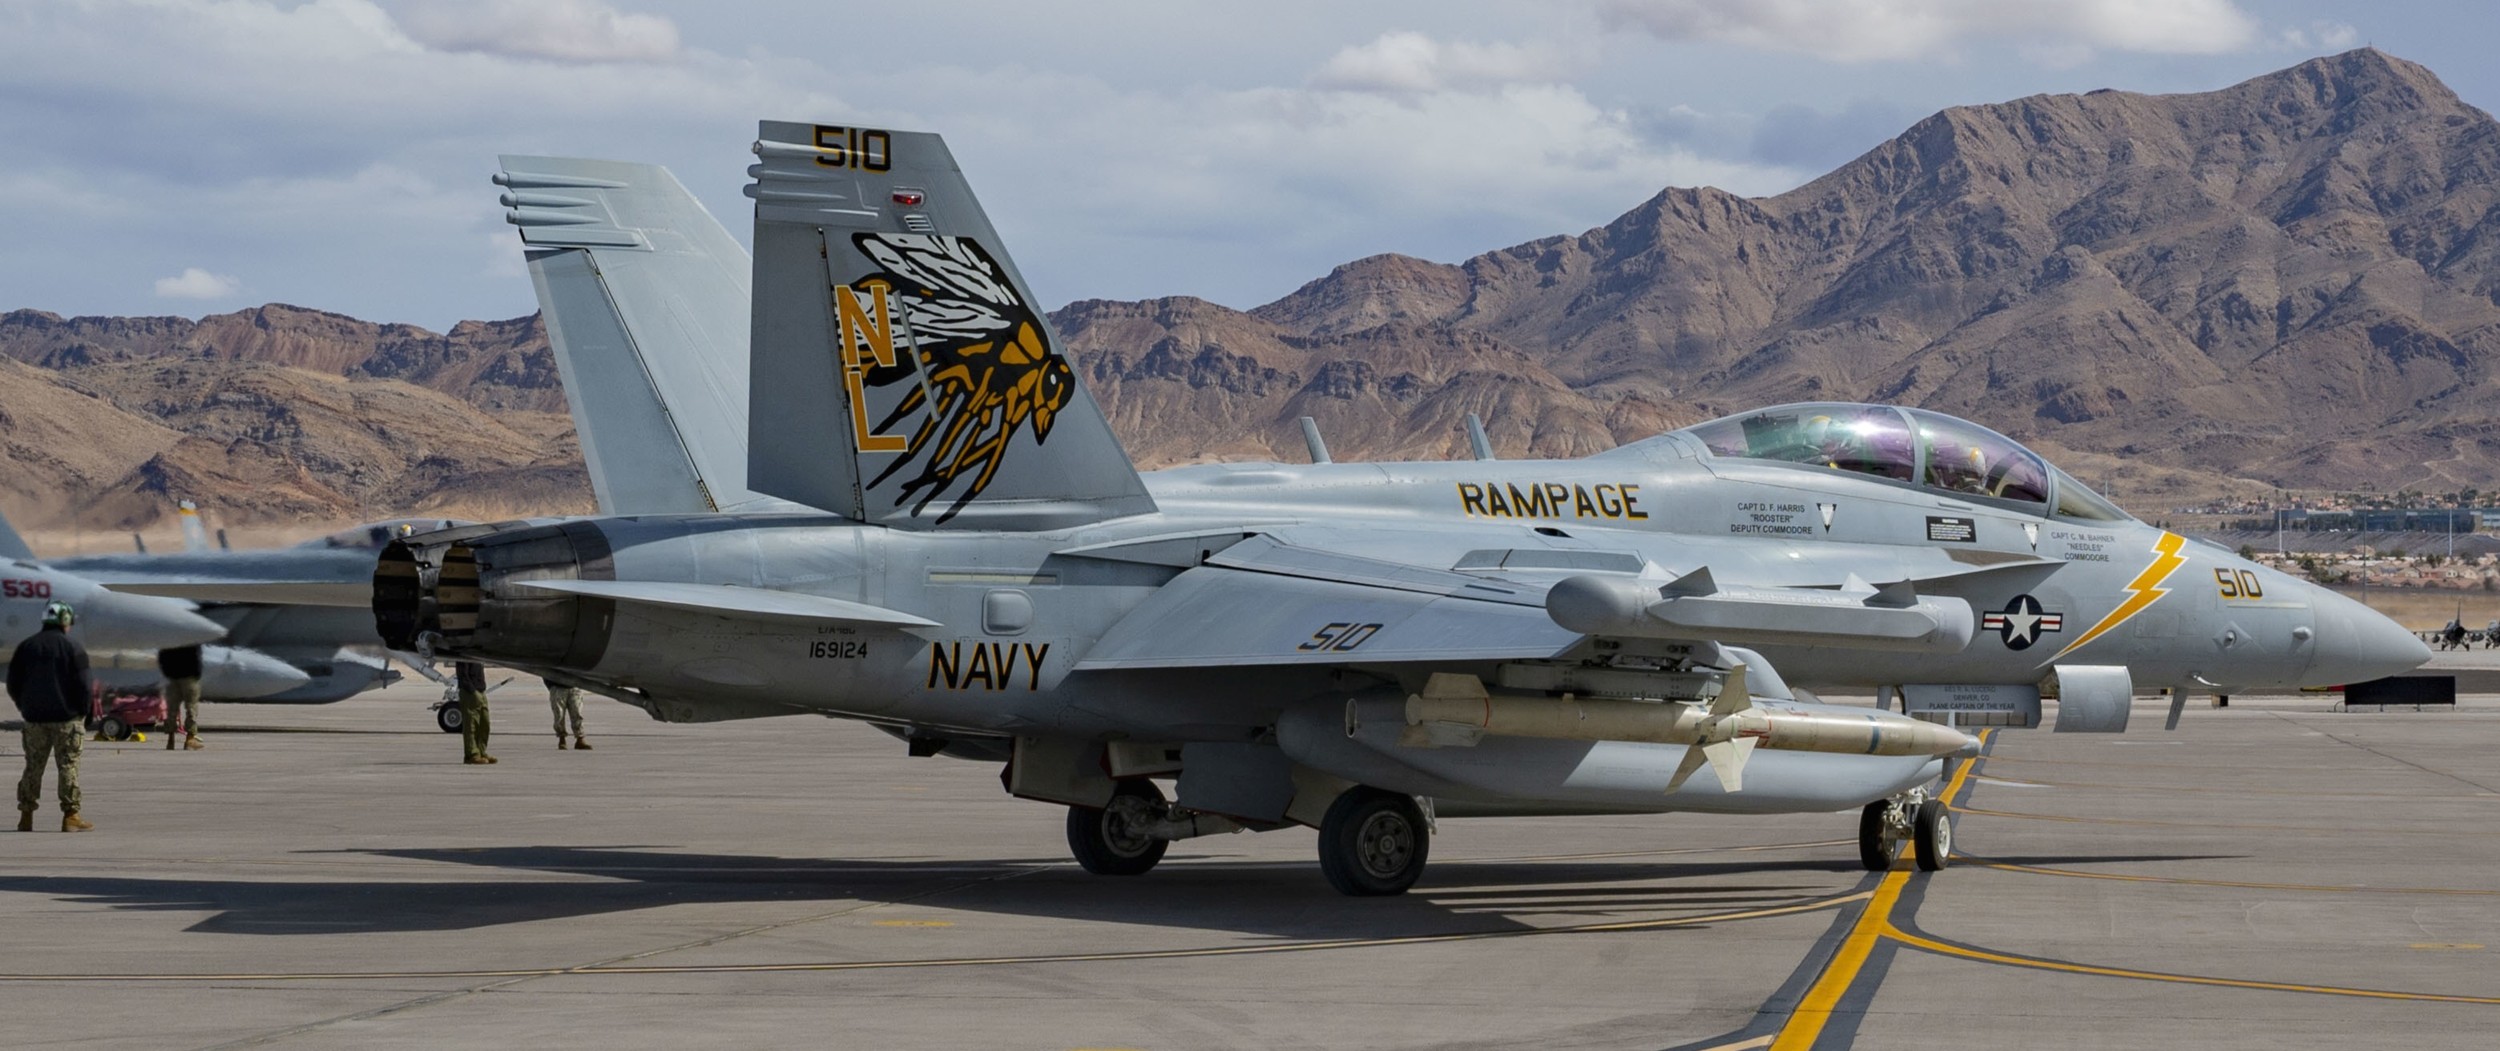 vaq-138 yellowjackets electronic attack squadron us navy boeing ea-18g growler exercise red flag nellis afb nevada 60